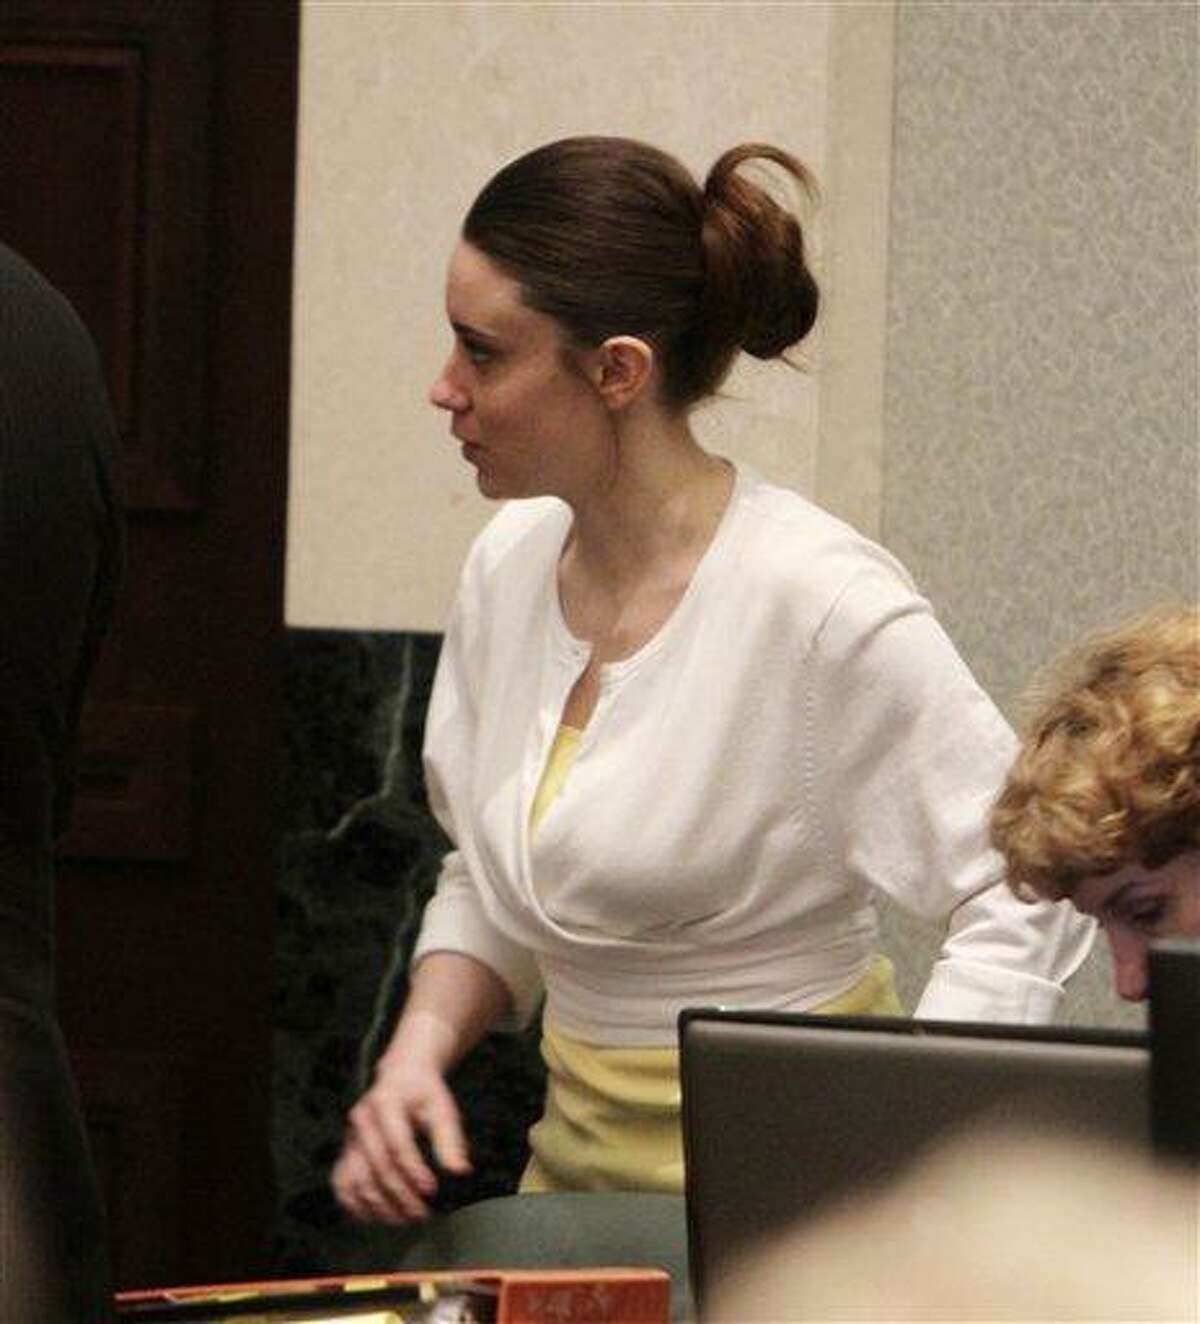 Casey Anthony enters the courtroom before the start of court in her murder trial at the Orange County Courthouse, Tuesday, June 28, 2011, in Orlando, Fla. Anthony, 25, is charged with killing her daughter Caylee in the summer of 2008. (AP Photo/Red Huber, Pool)